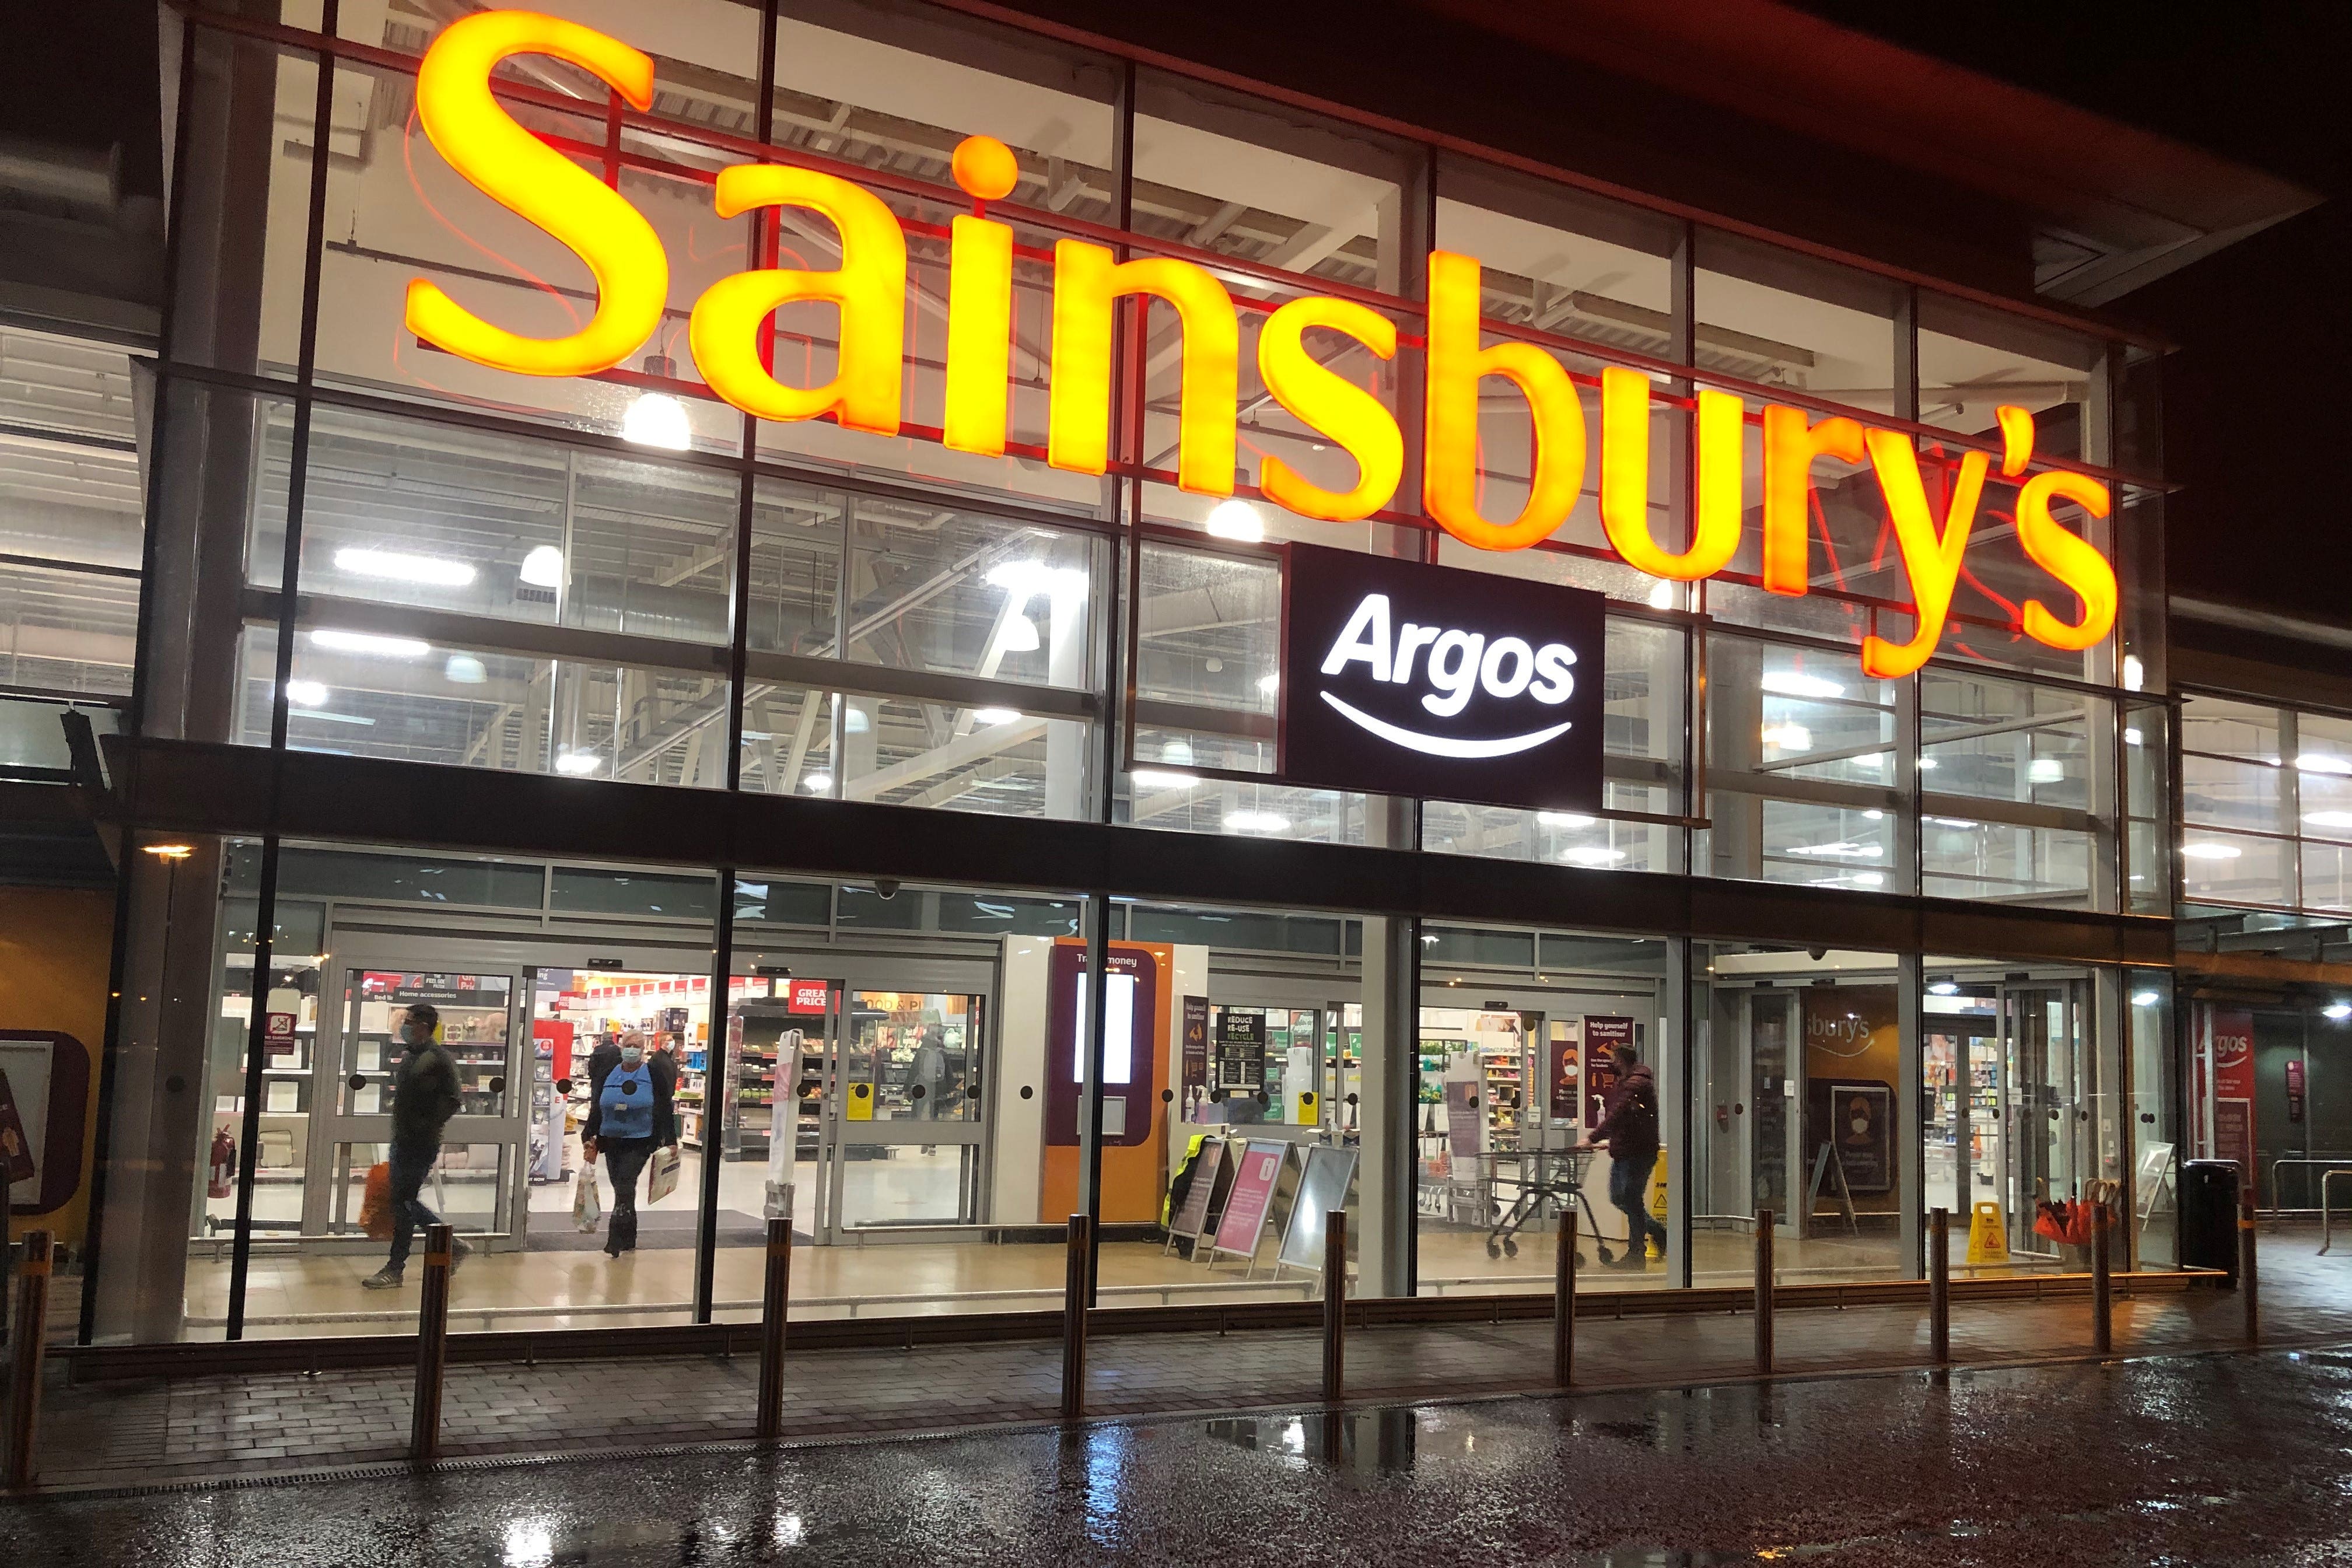 A busy Sainsbury’s store